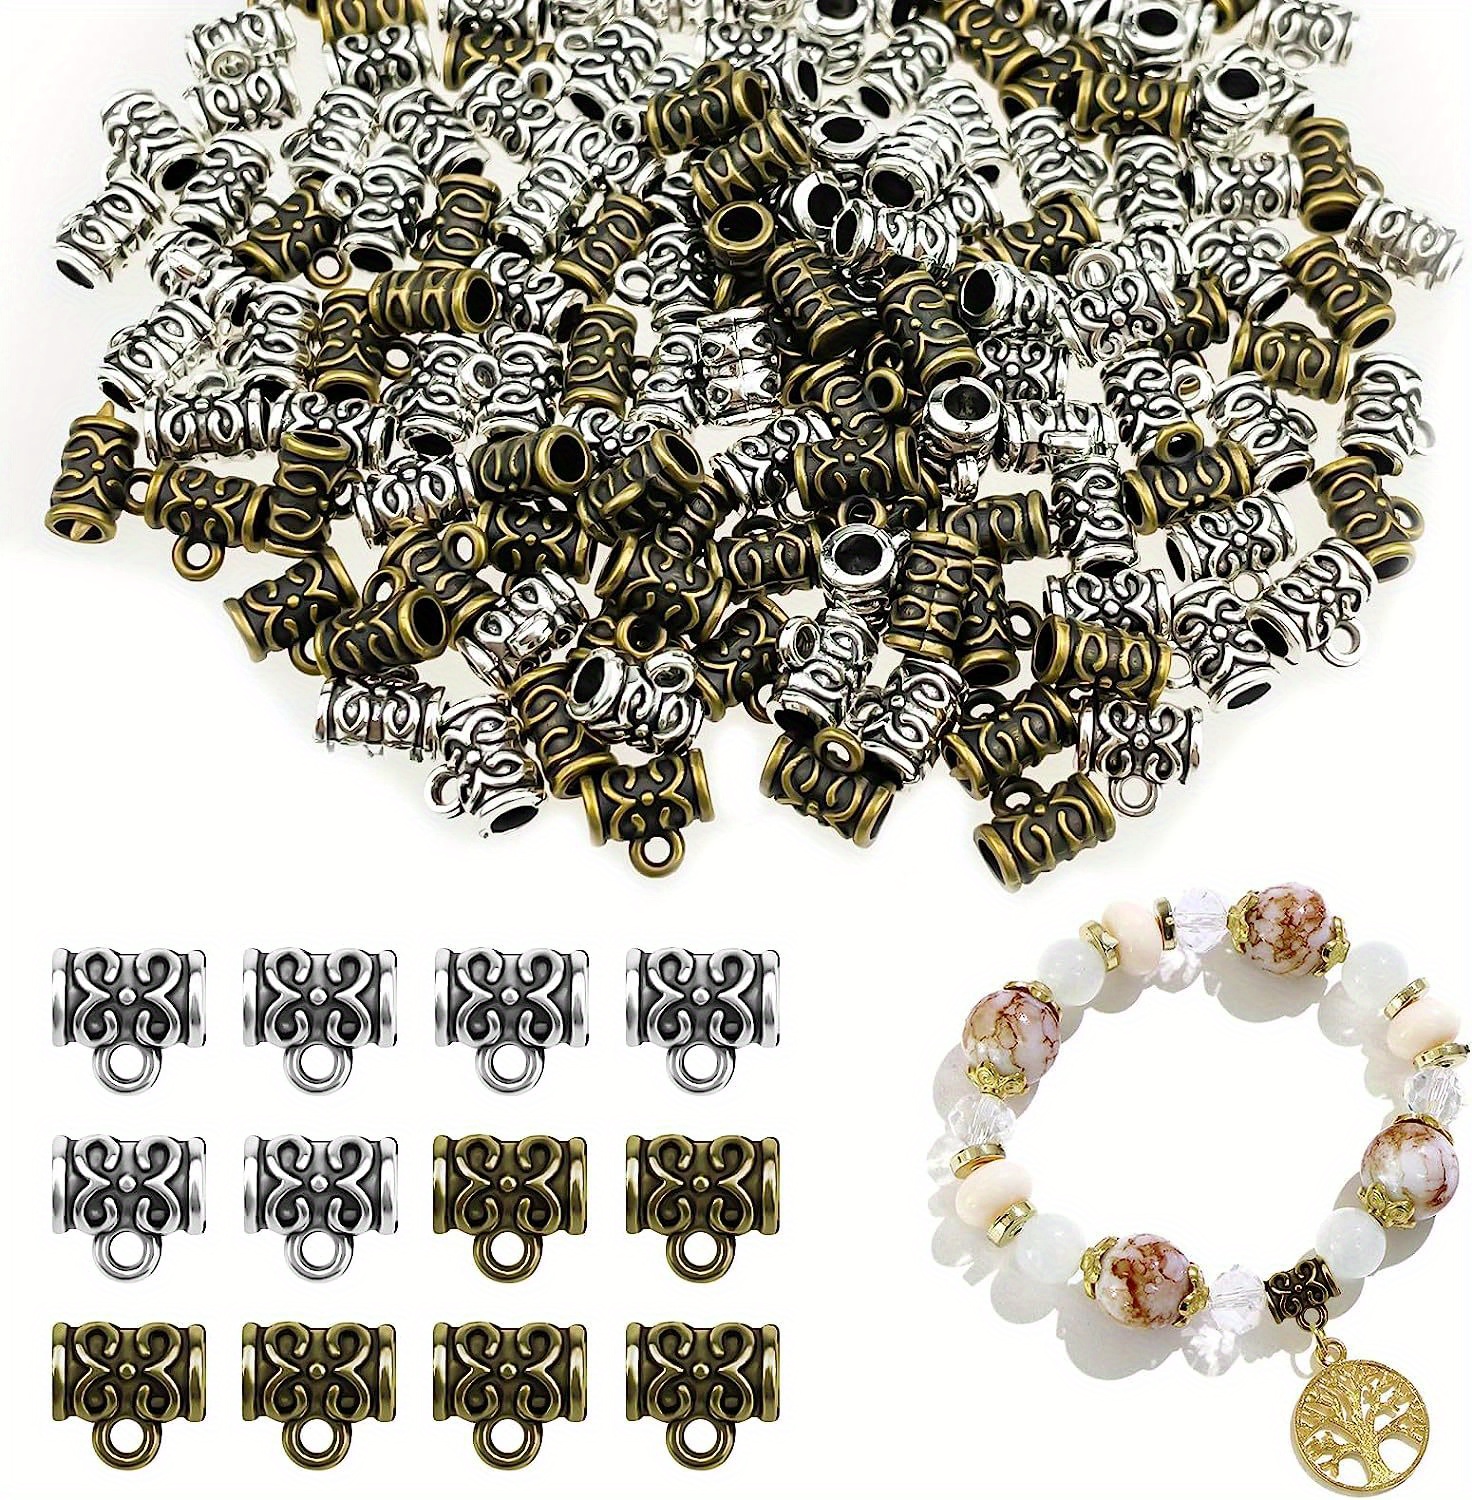 100pcs Gold Charms for Jewelry Making with 15pcs Clasps & Rings